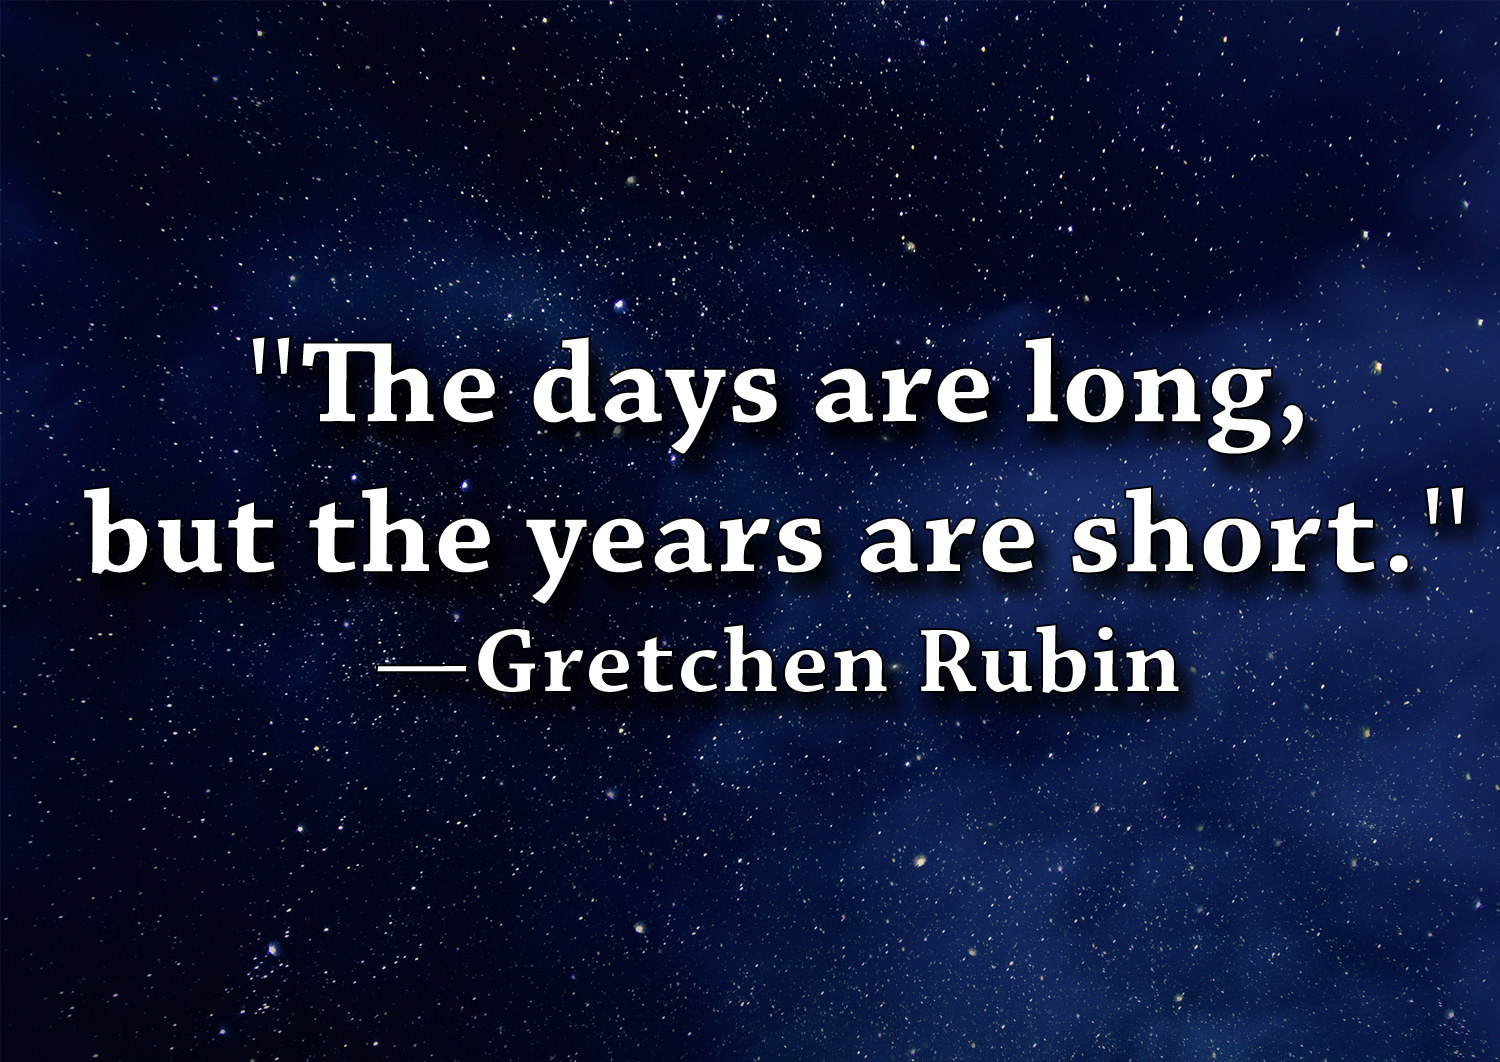 &quot;The days are long, but the years are short.&quot;